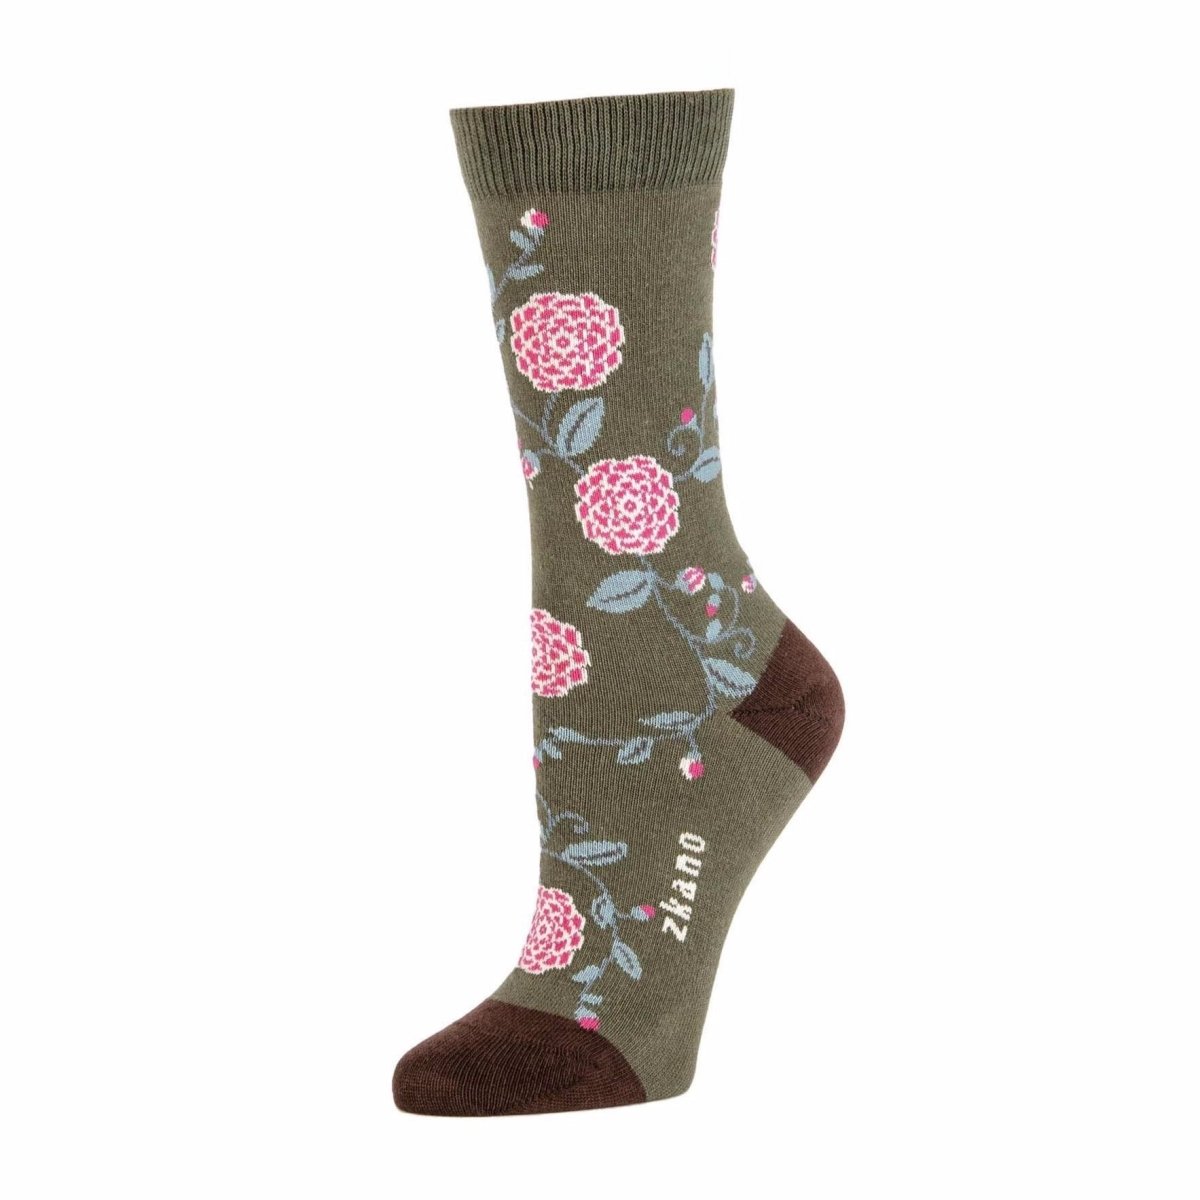 Army green sock with bright pink floral pattern and a dark brown heel and toe accent. The Camilla Floral Crew Sock in Army is from Zkano and made in Alabama, USA.